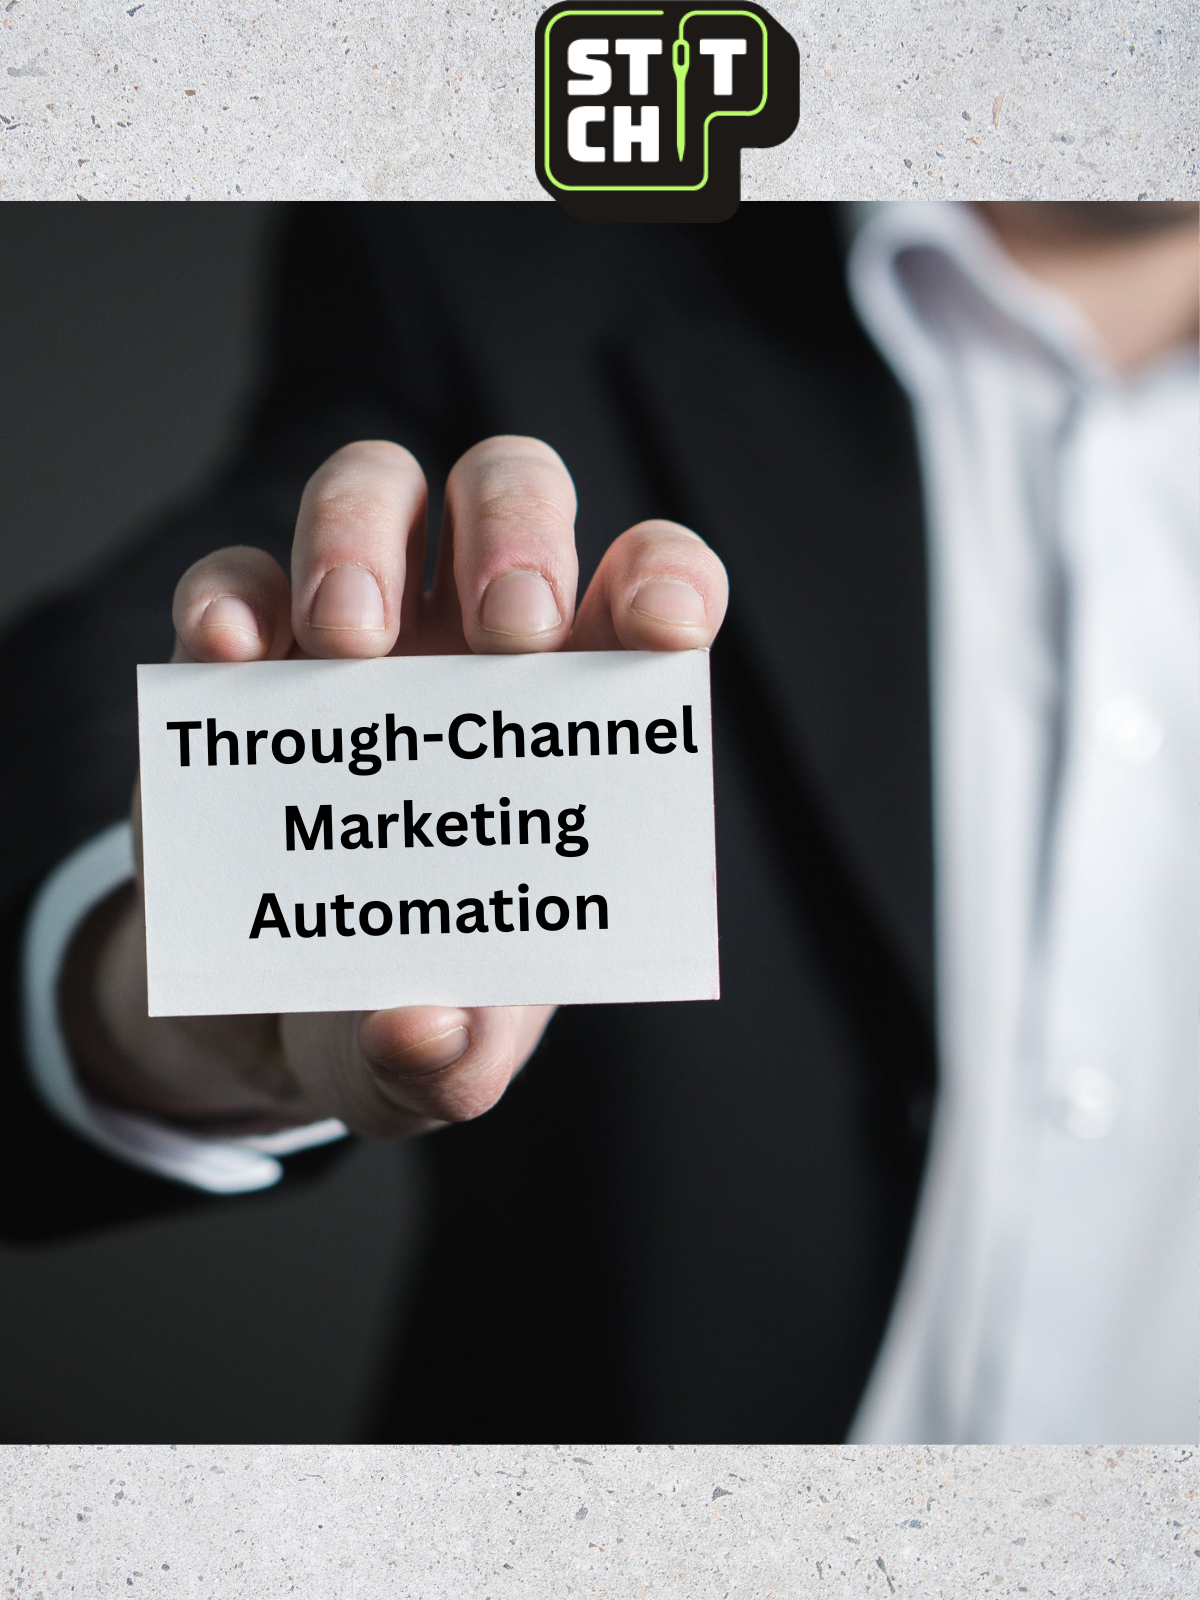 Through-Channel Marketing Automation